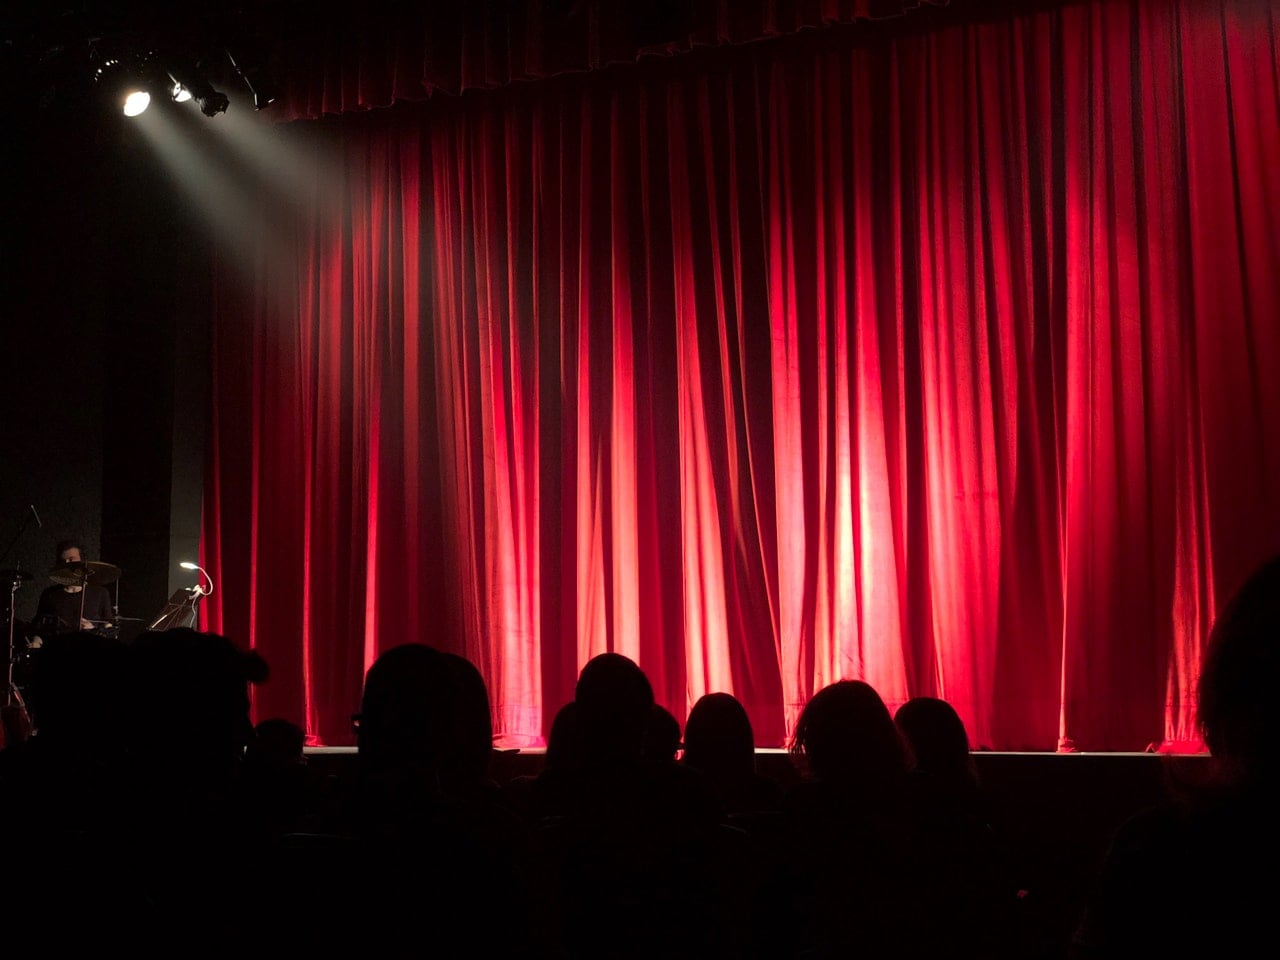 A lowered curtain in a theater.
